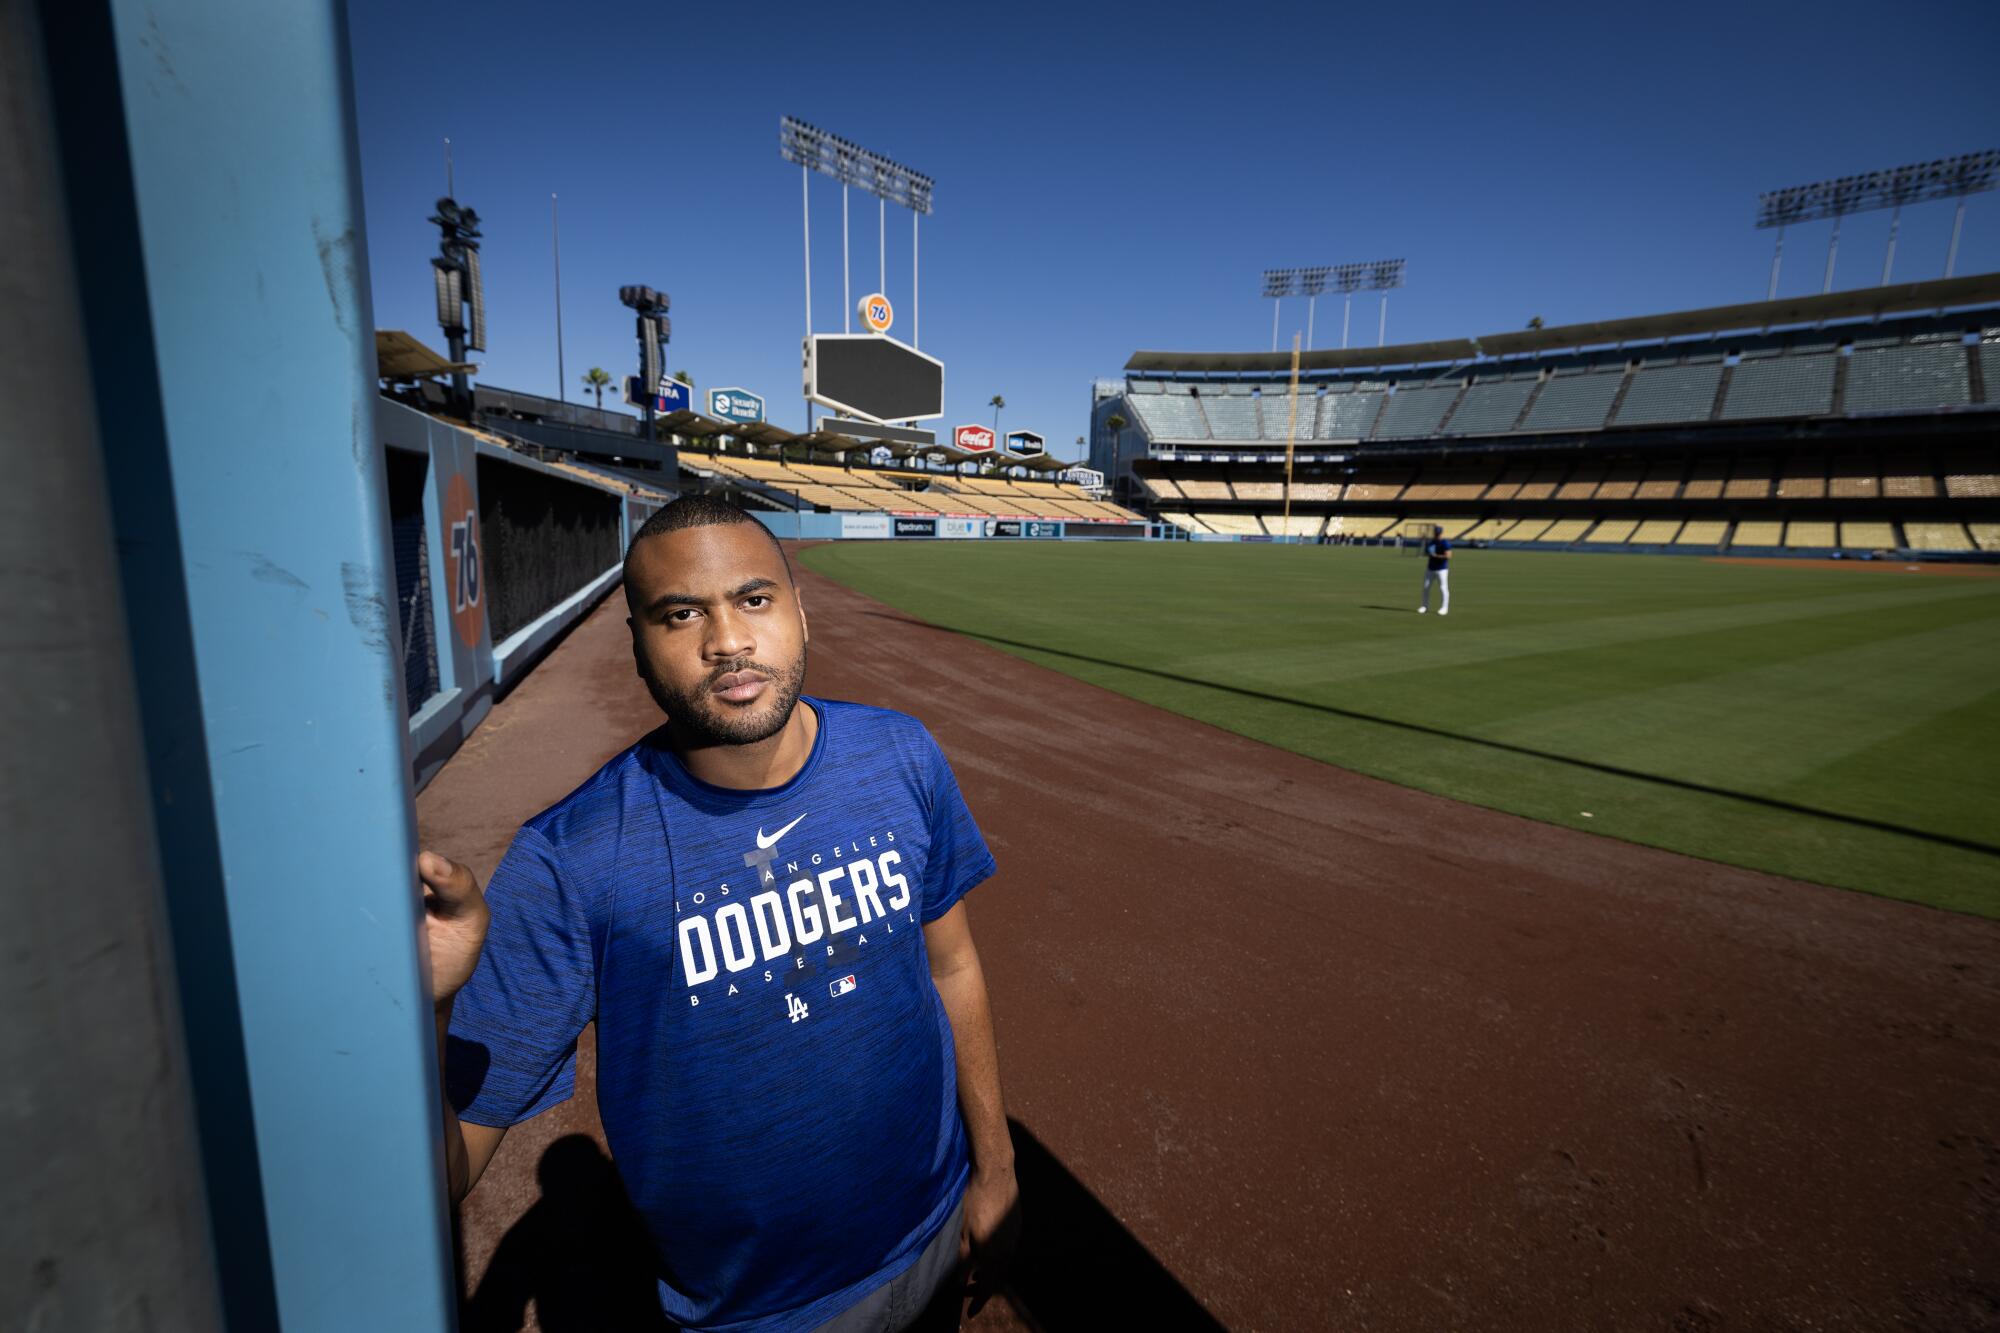 RJ Peete, a Dodgers clubhouse attendant, prepares the bullpen before every game at Dodger Stadium.